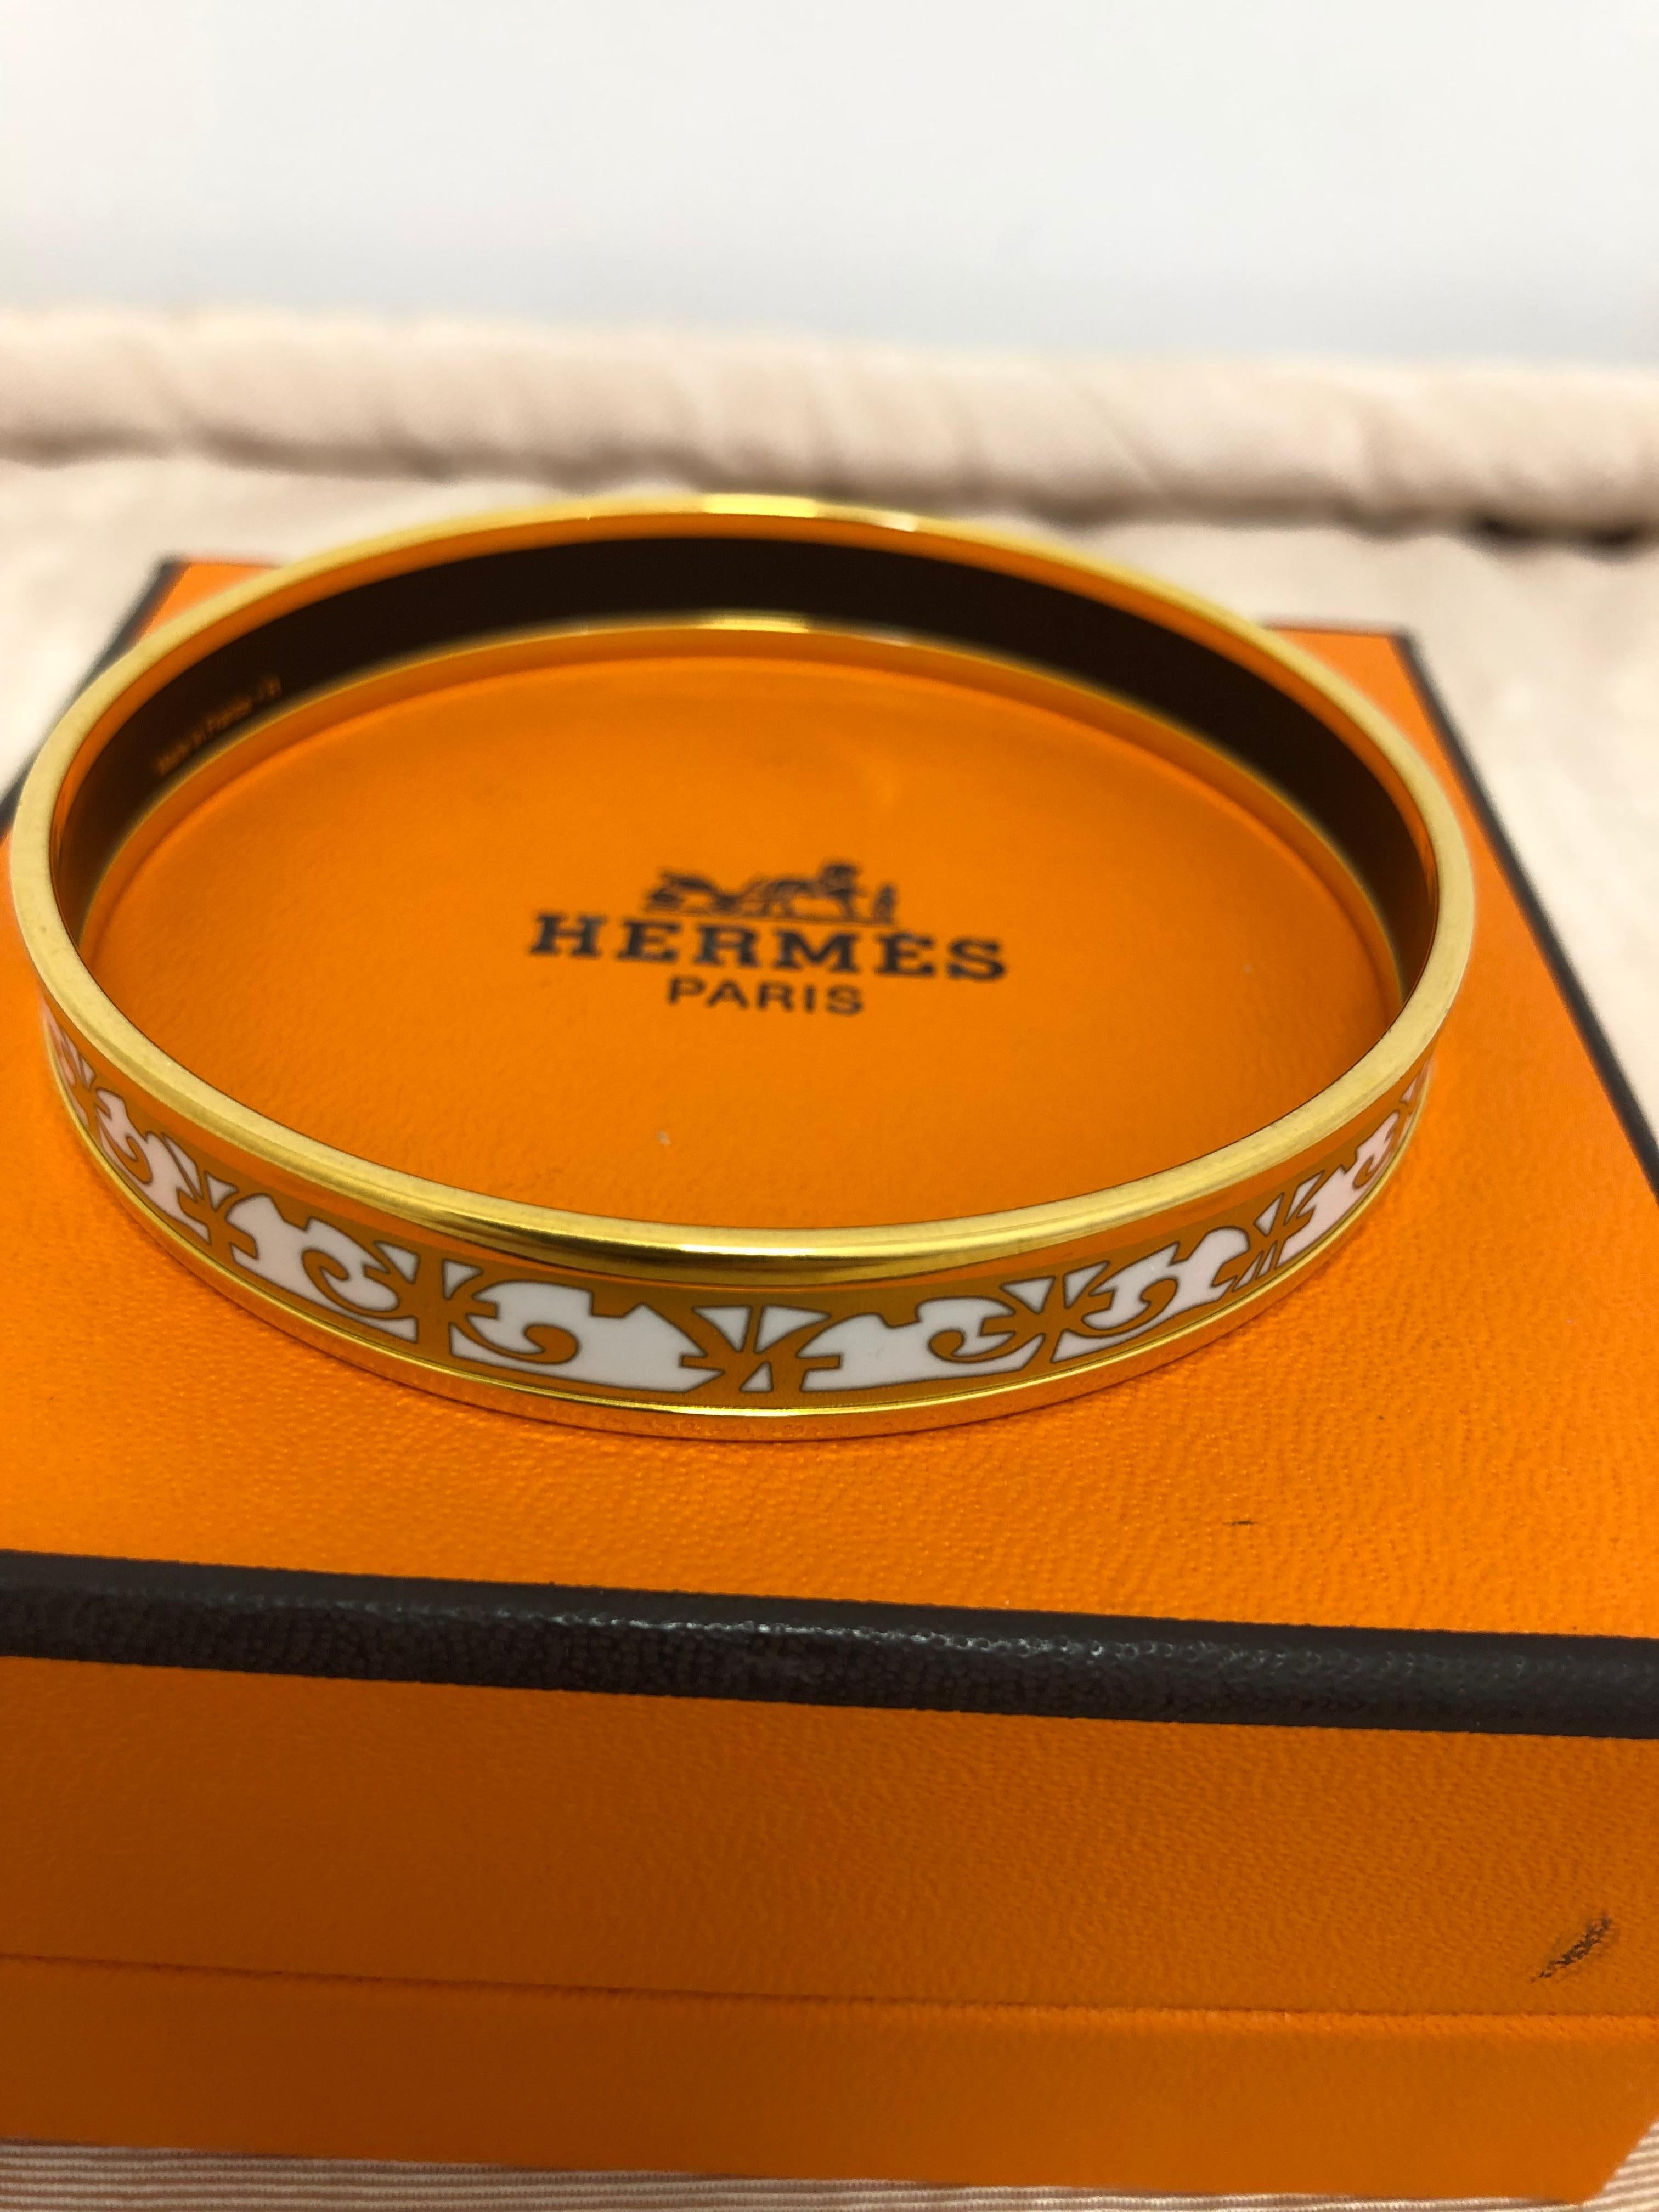 Made in France this 2014 printed enamel and gold plated bangle is both simple and sophisticated, and a piece you can wear on a daily basis.